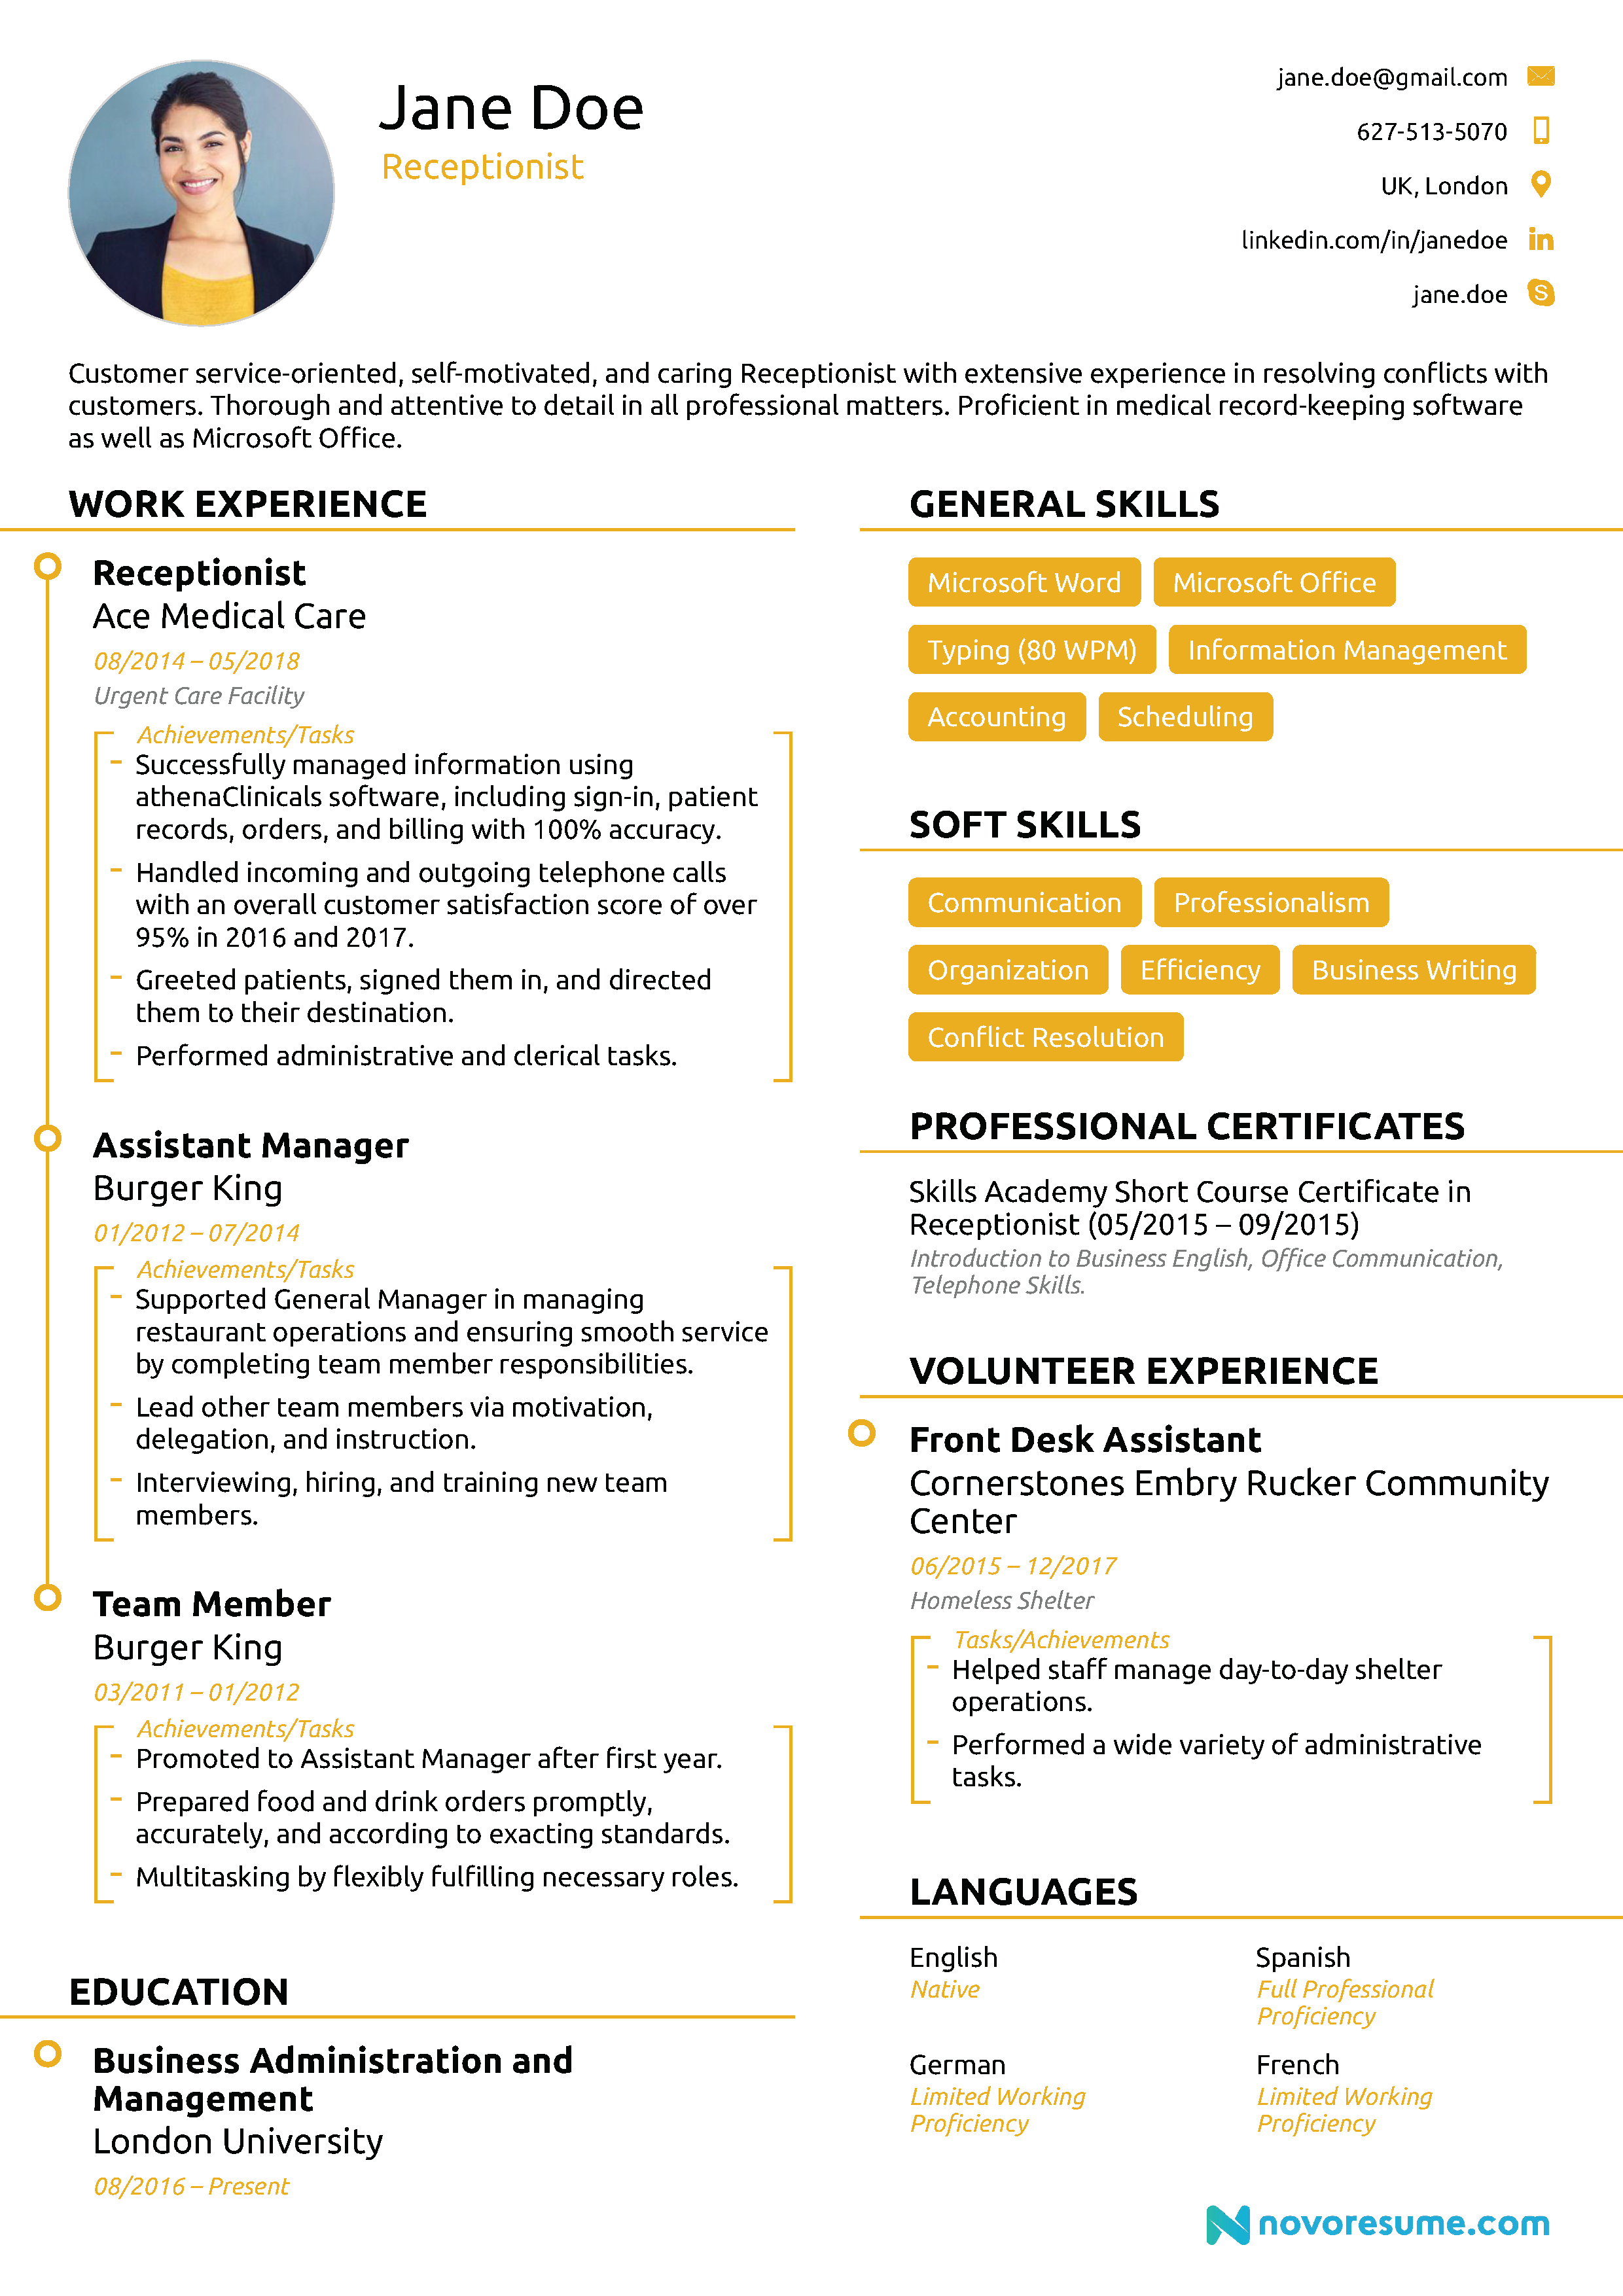 resume profile examples for receptionist